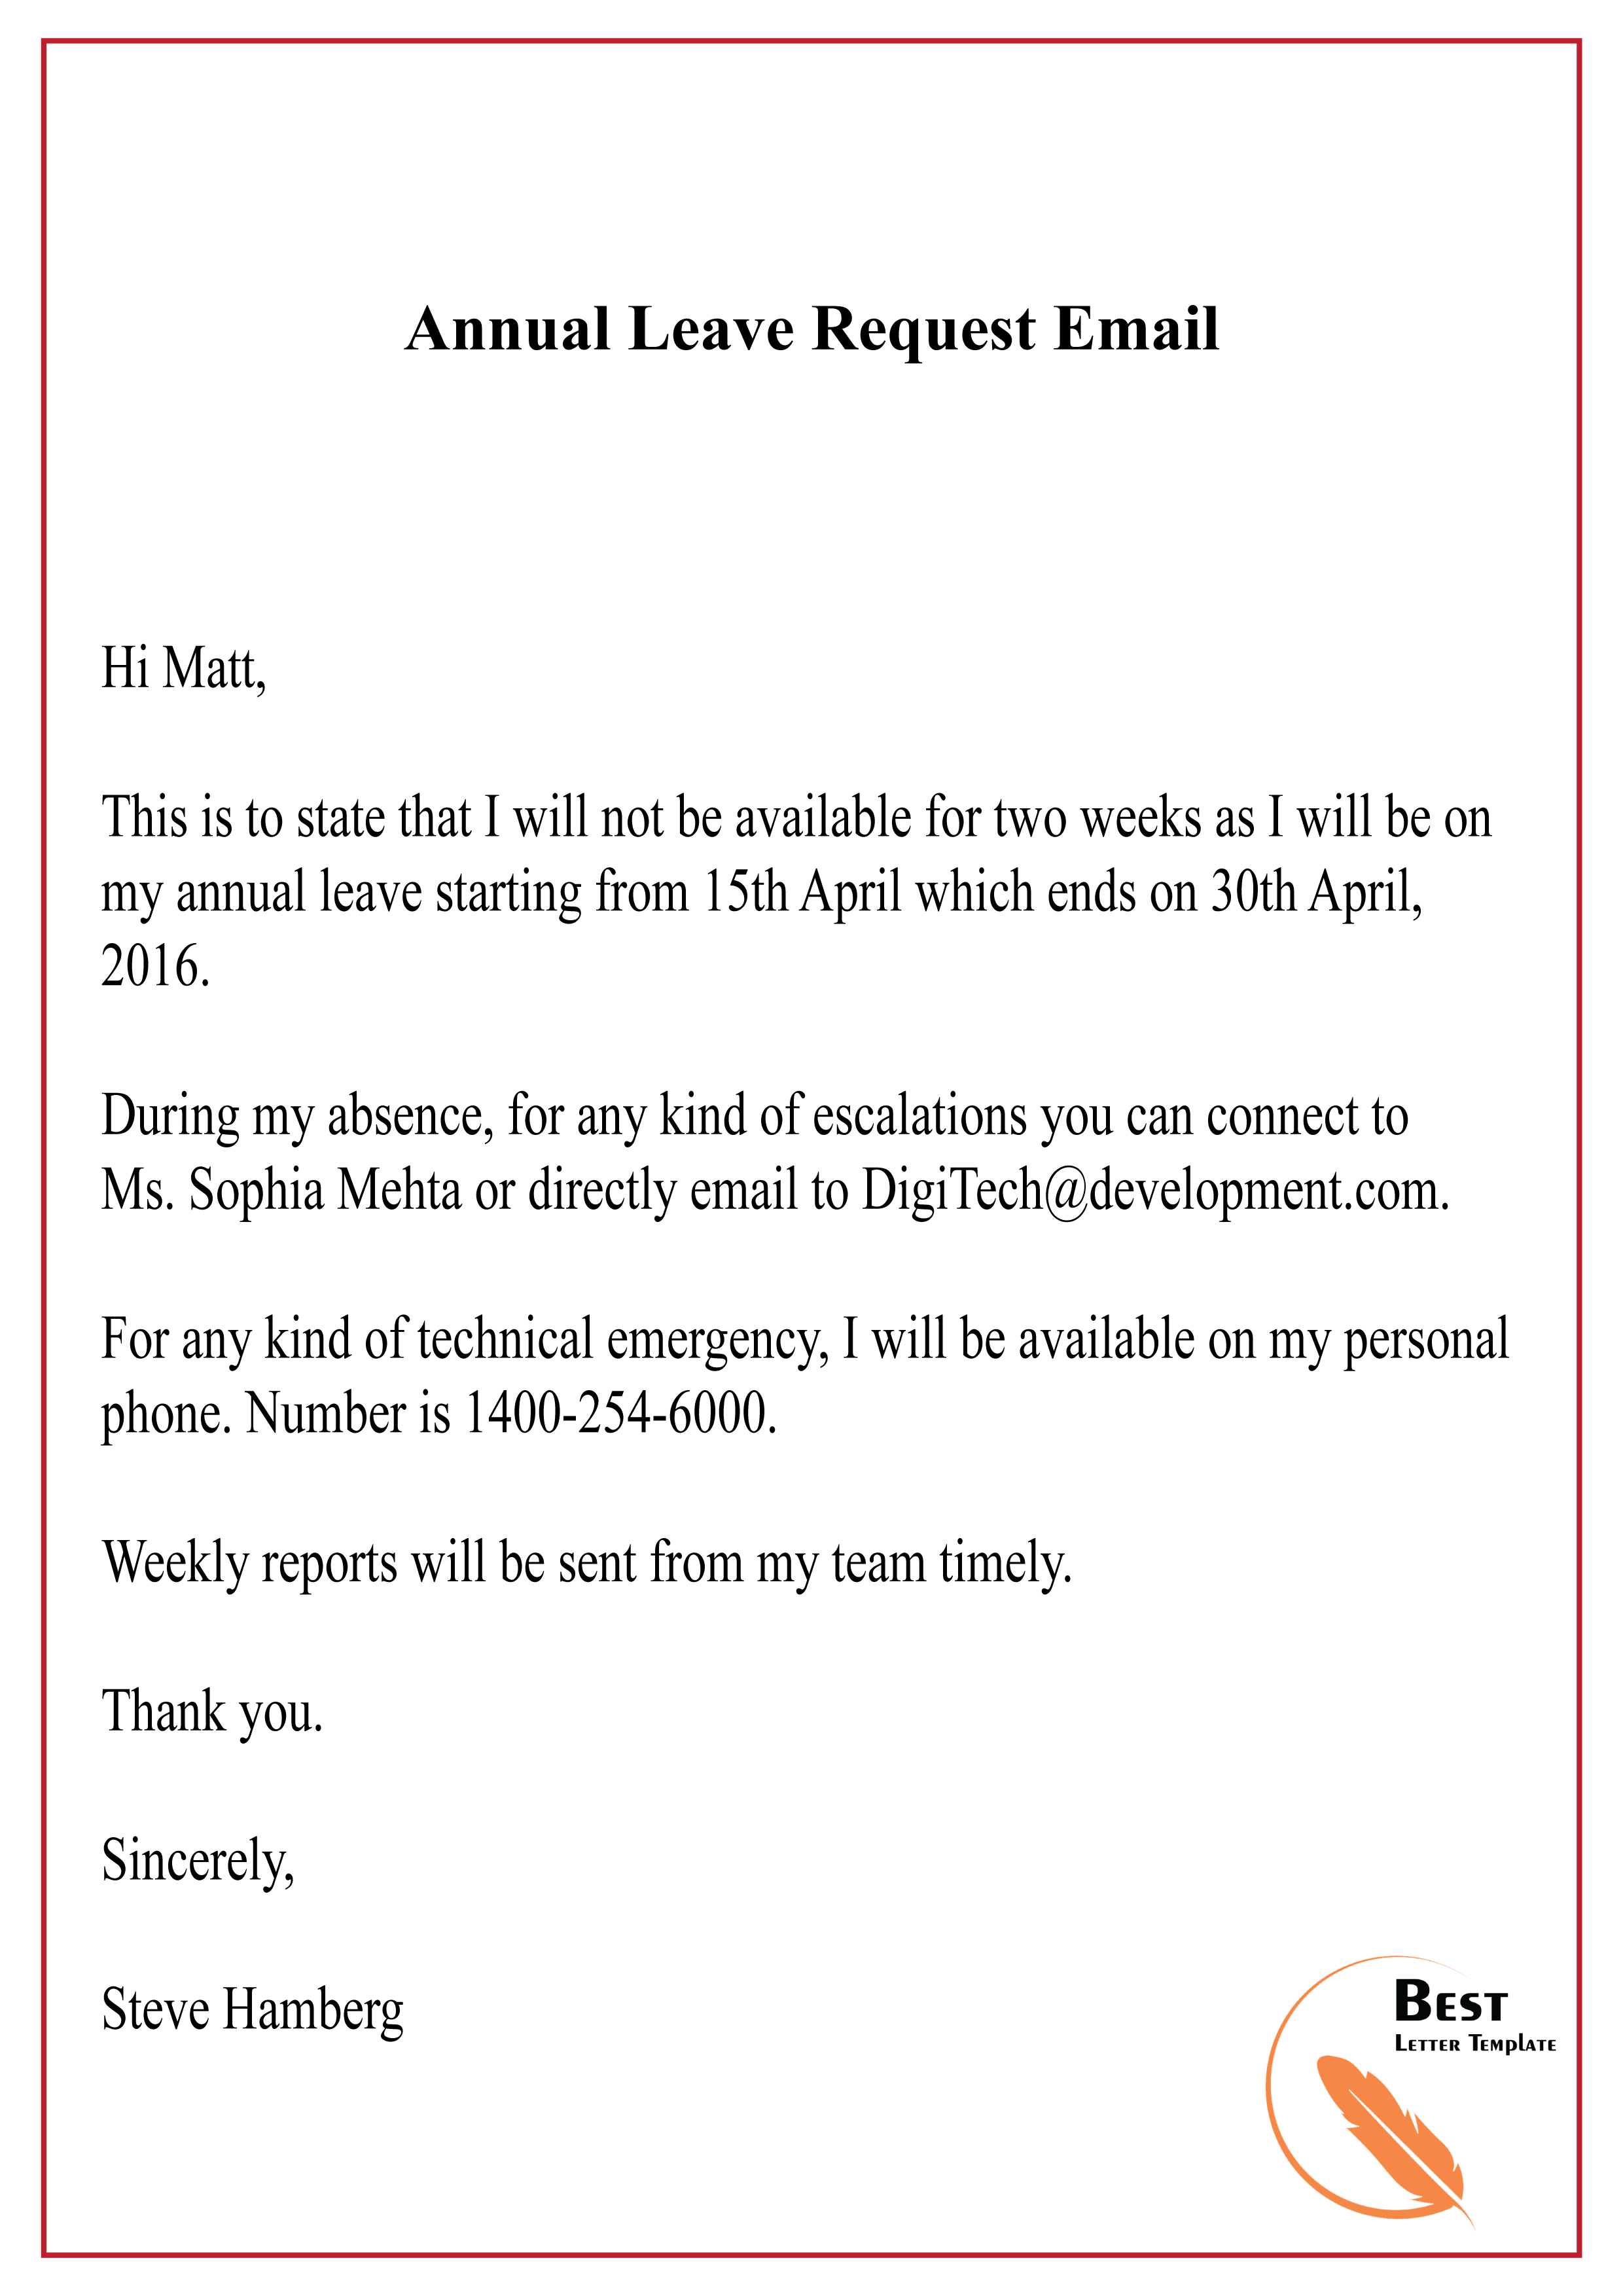 Annual Leave Request Email-01 - Best Letter Template